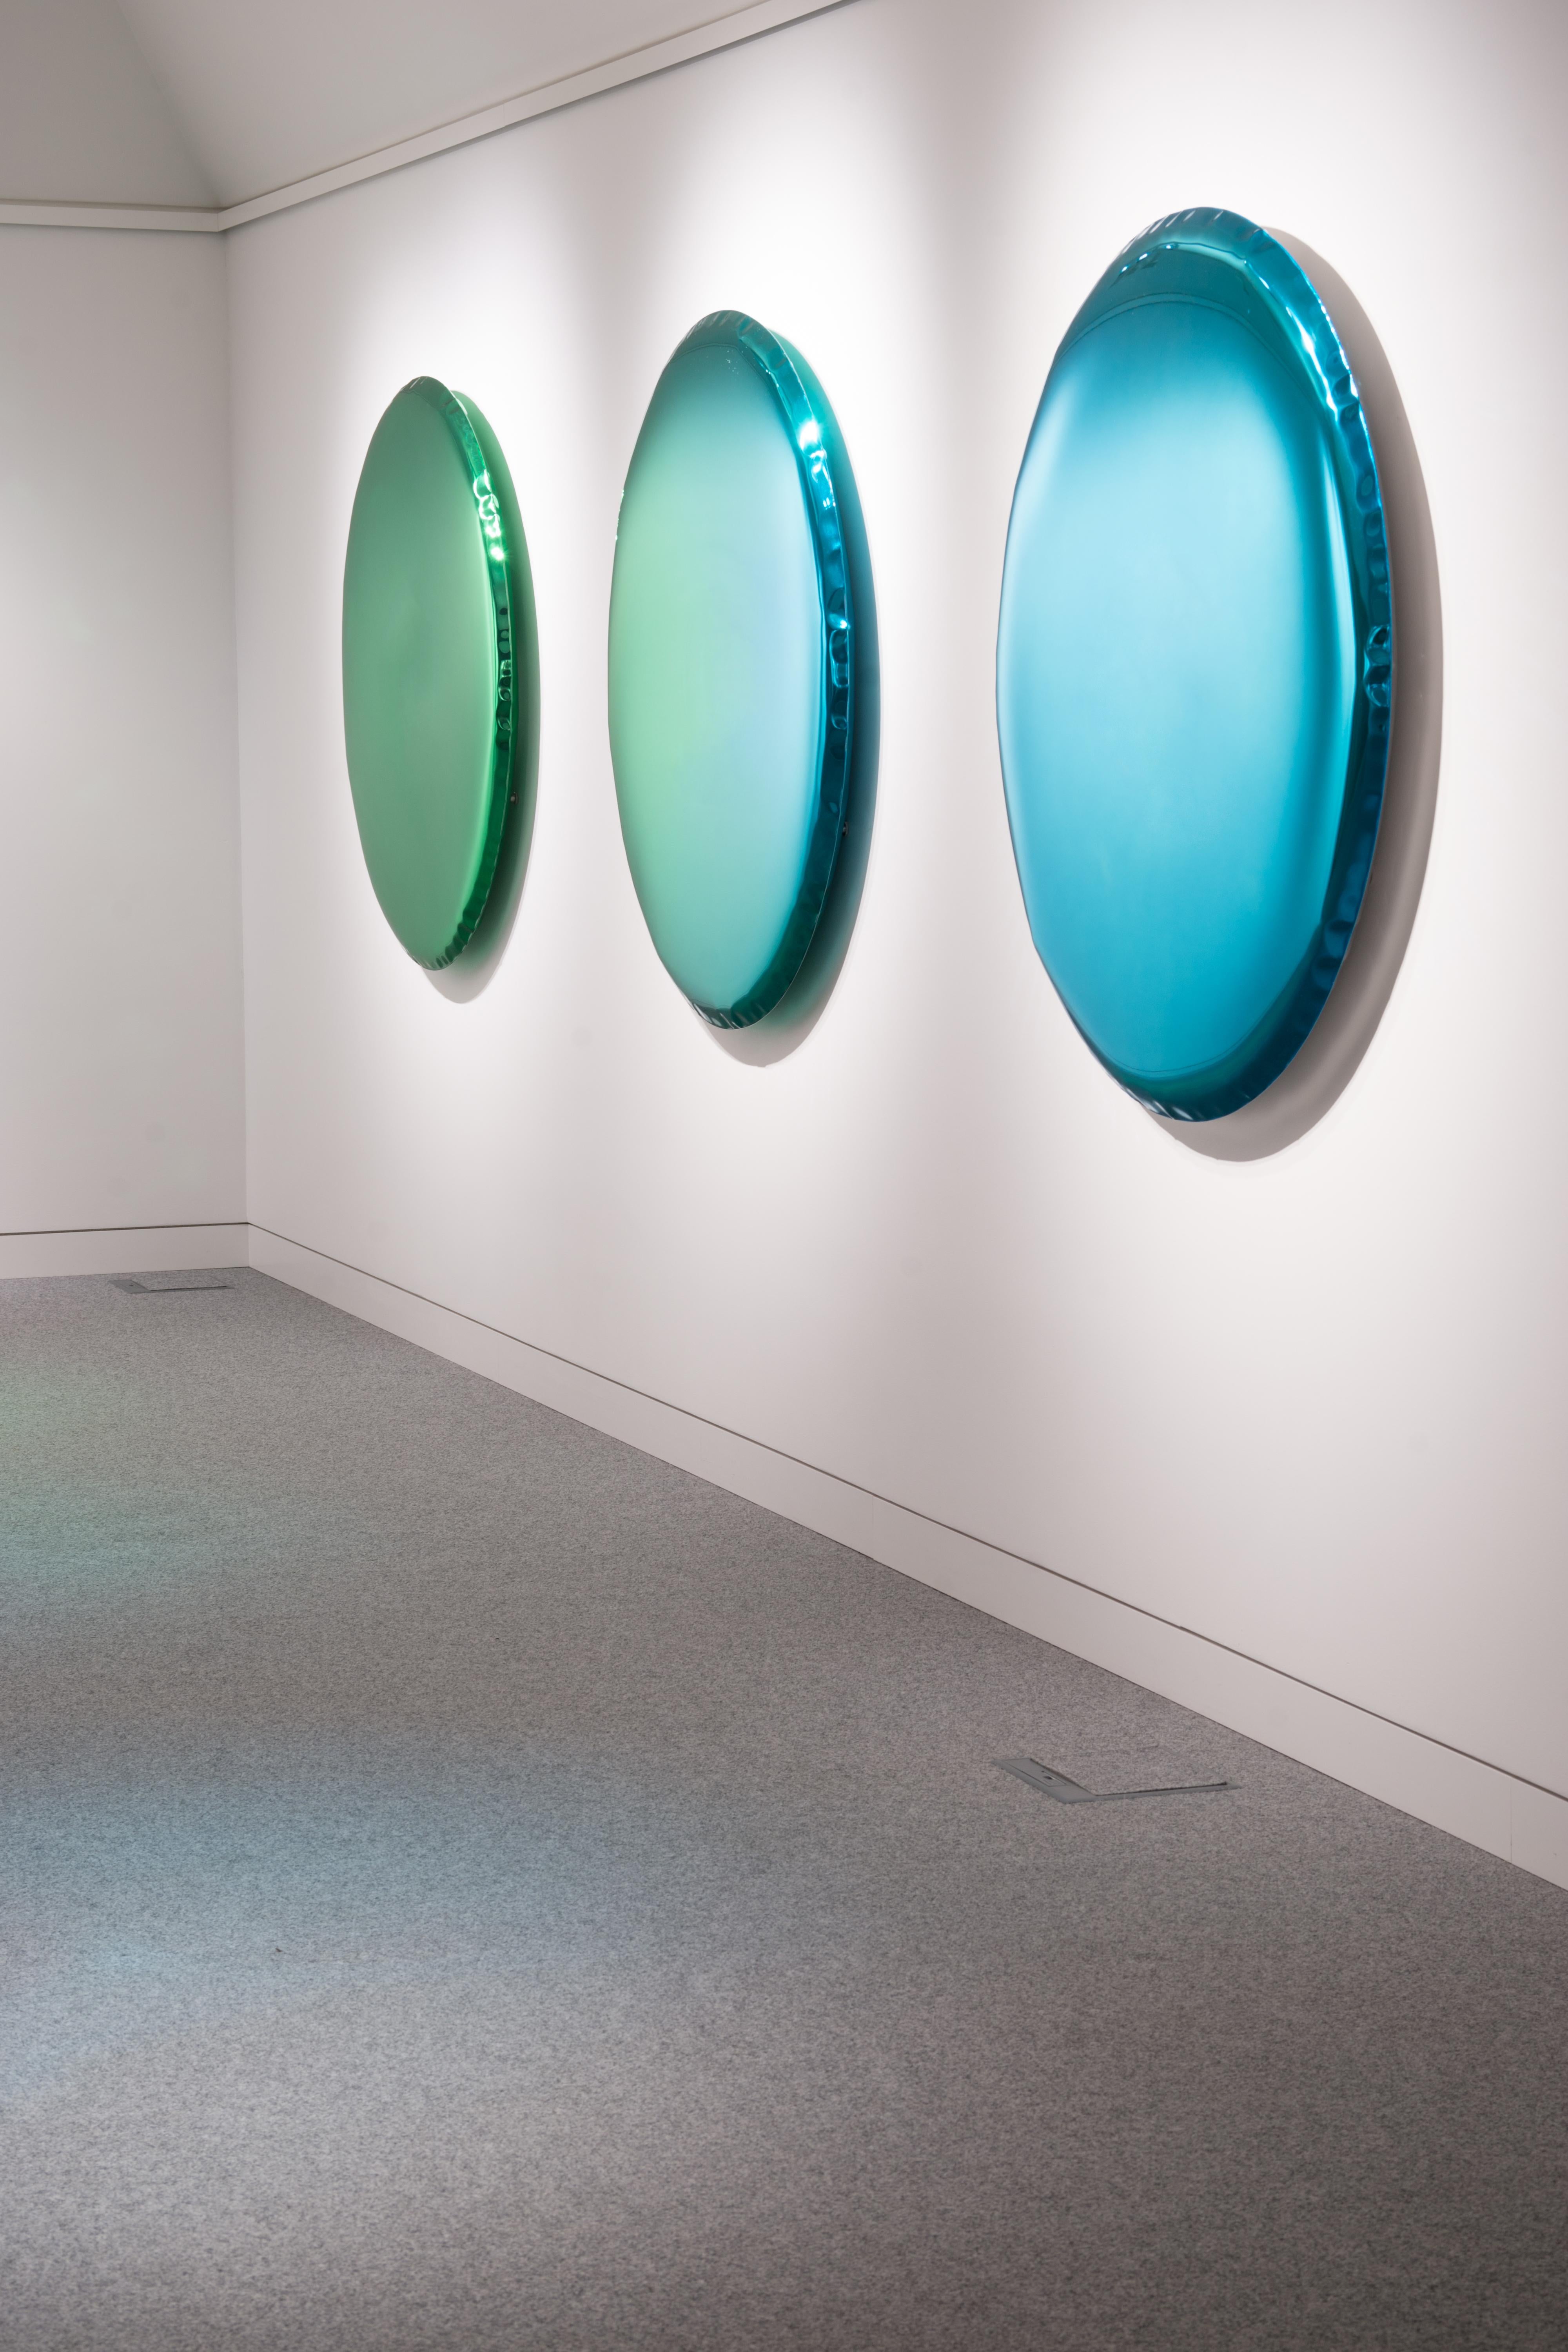 OKO 120 contemporary mirror by Zieta
Sapphire
Gradient collection
New model created in 2020

Stainless steel
Measures: 120 x 6 cm.

Three colors available: 
- Emerald green 
- Sapphire blue
- Gradient emerald/sapphire

Zieta is best known for his